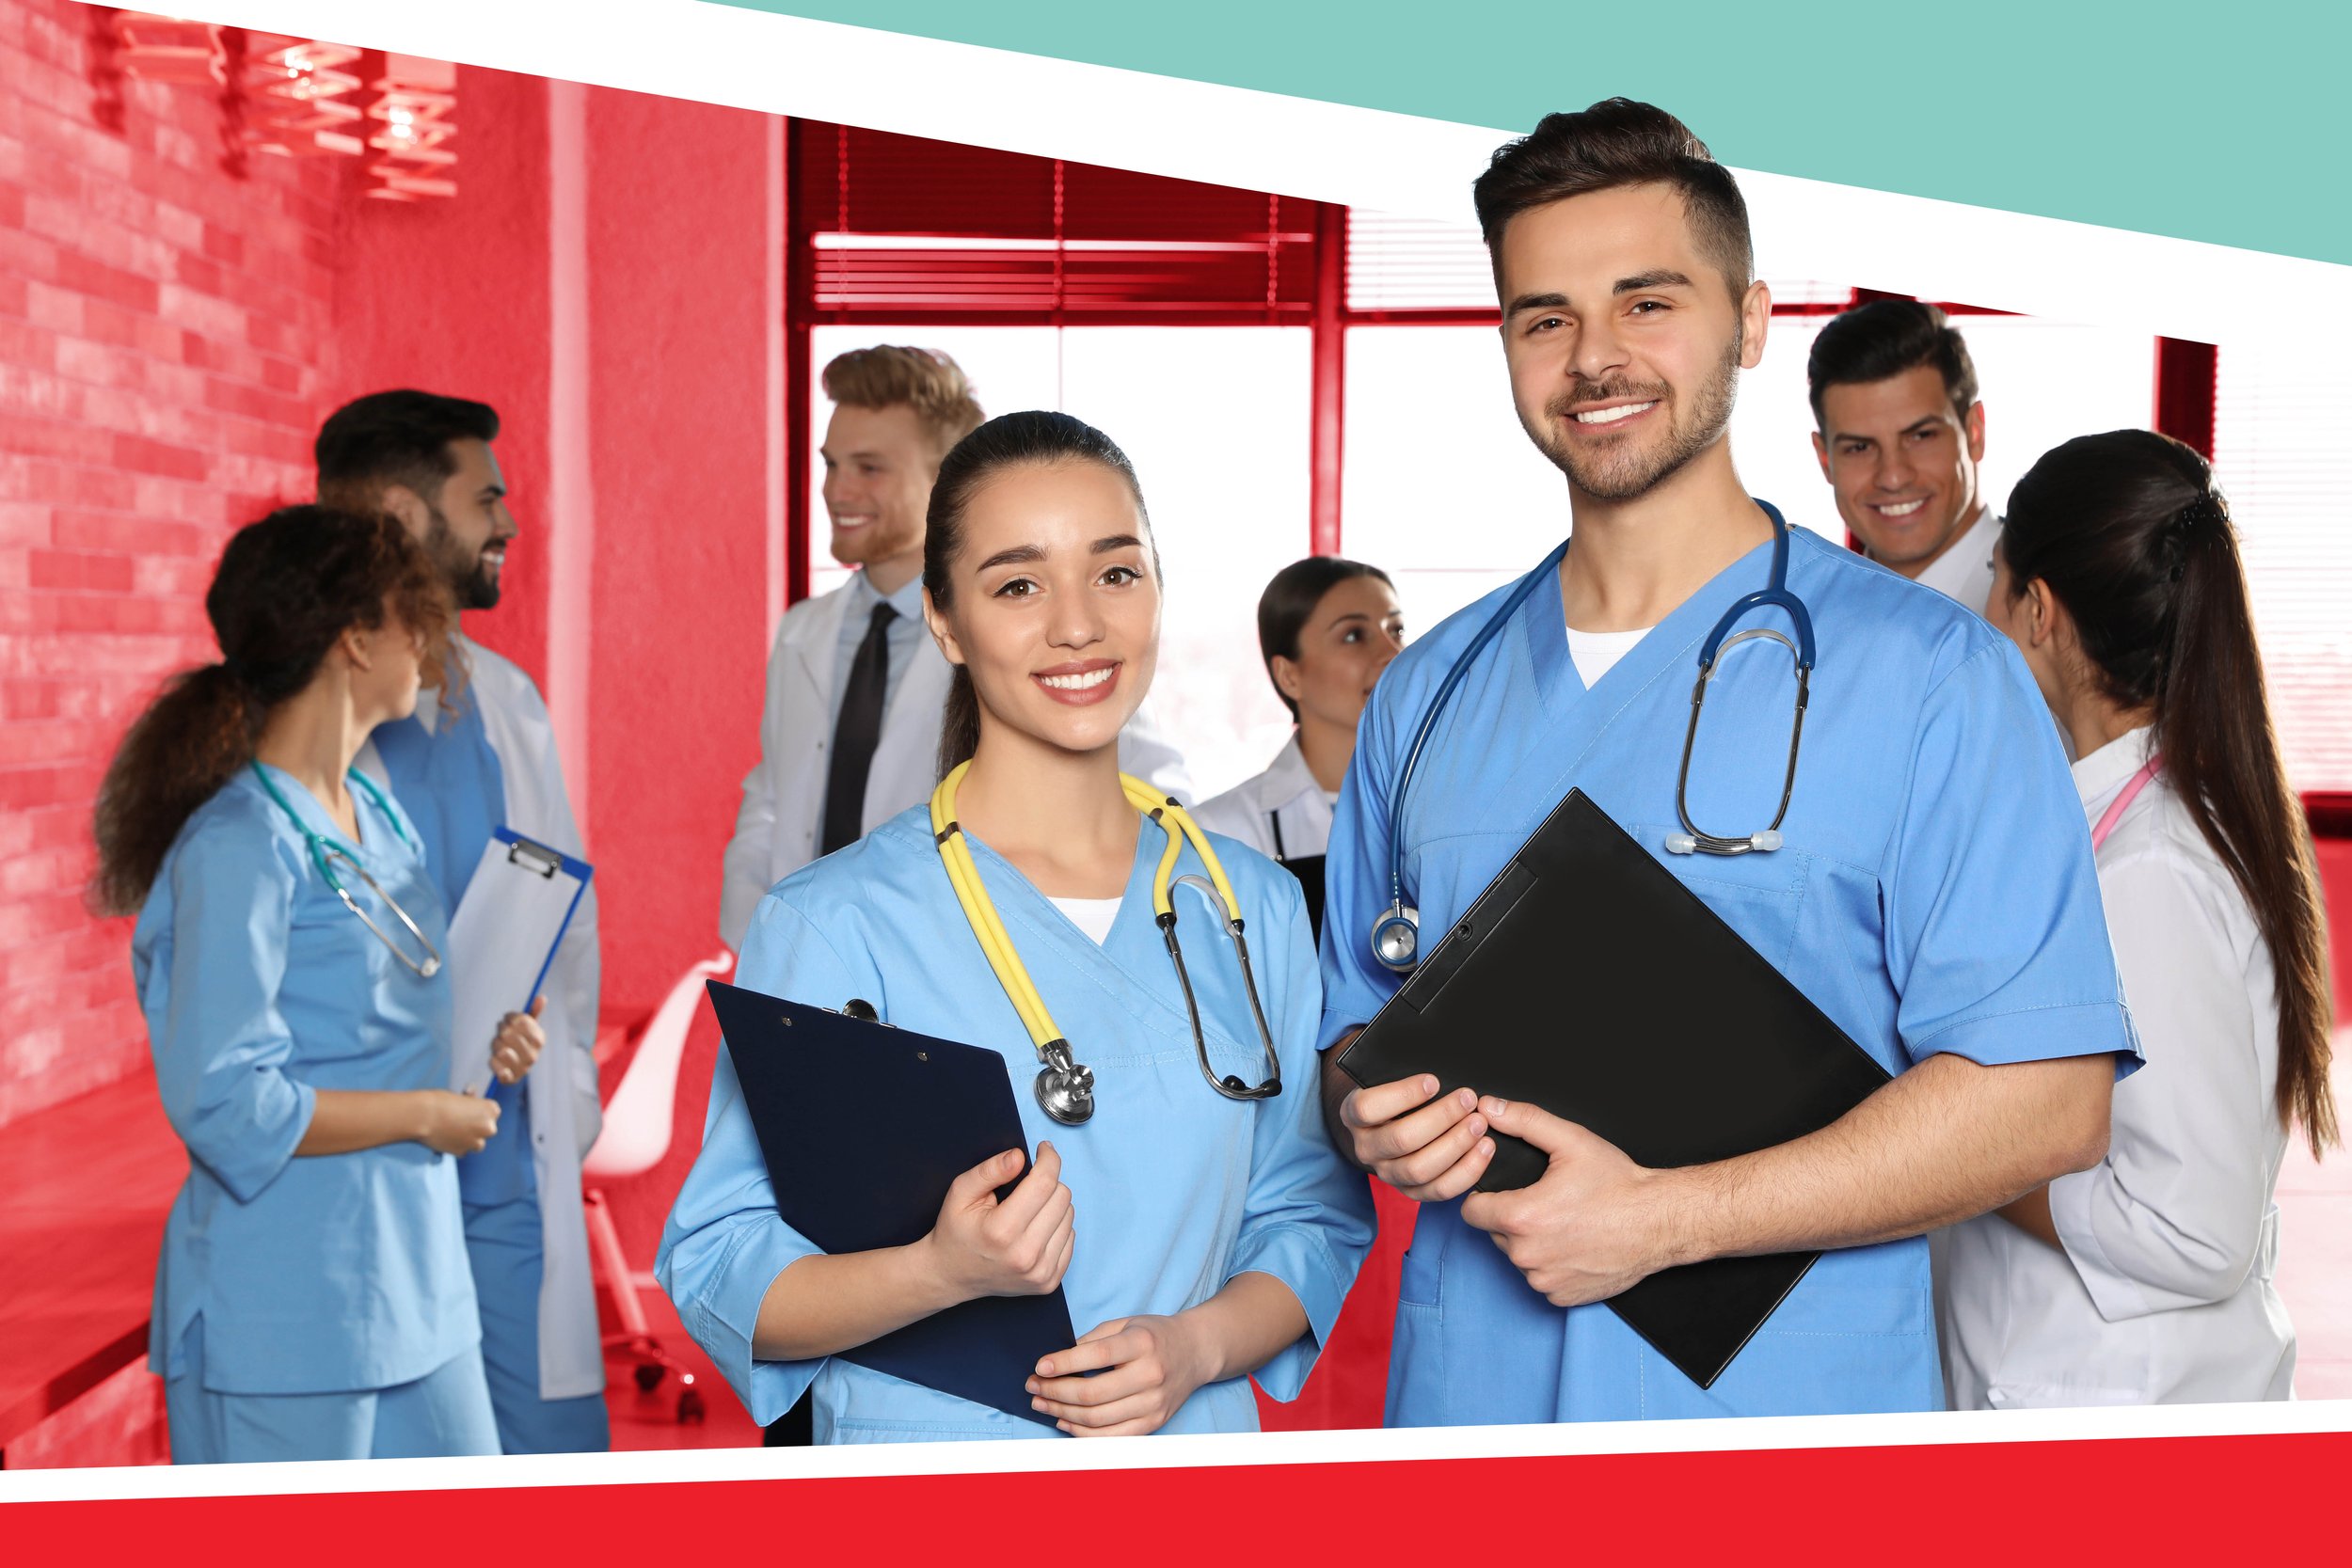 2 smiling medical school students wearing blue scrubs standing in front of a group of chatting doctors